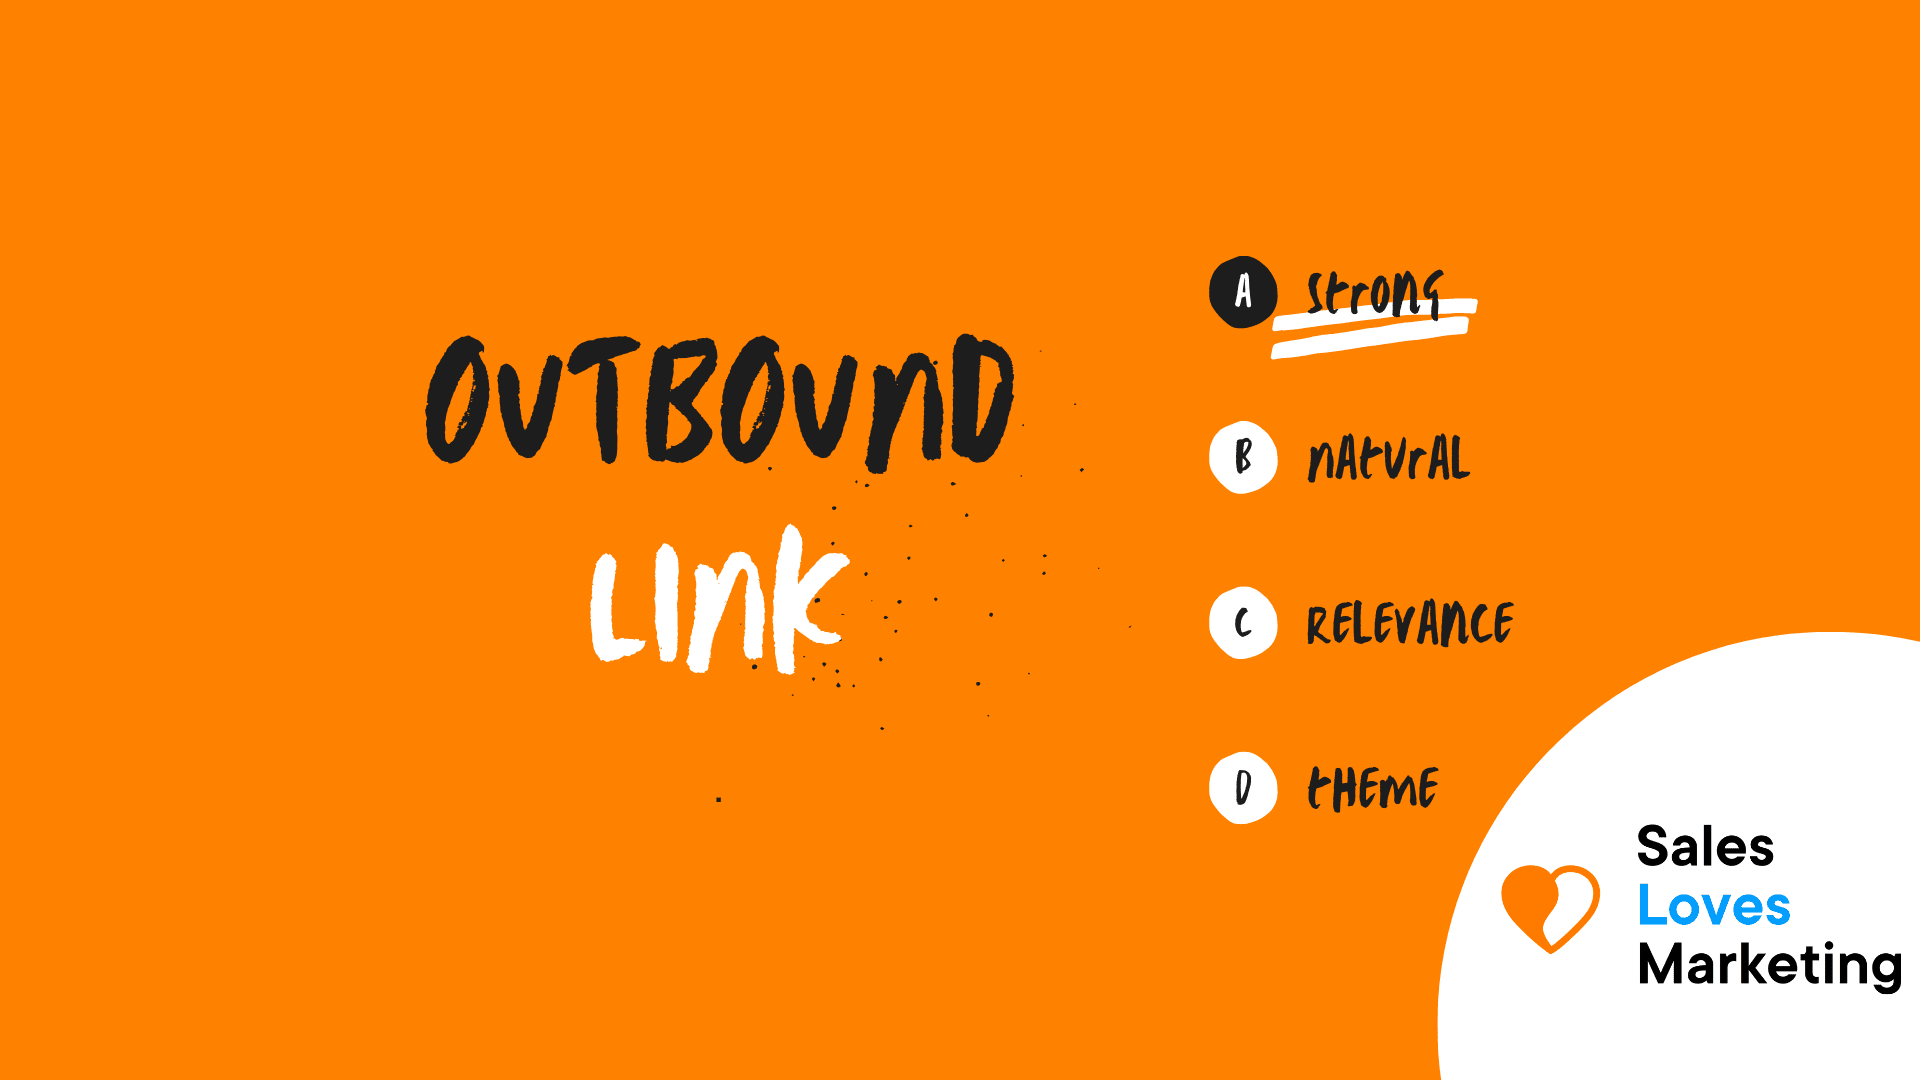 Outbound Link